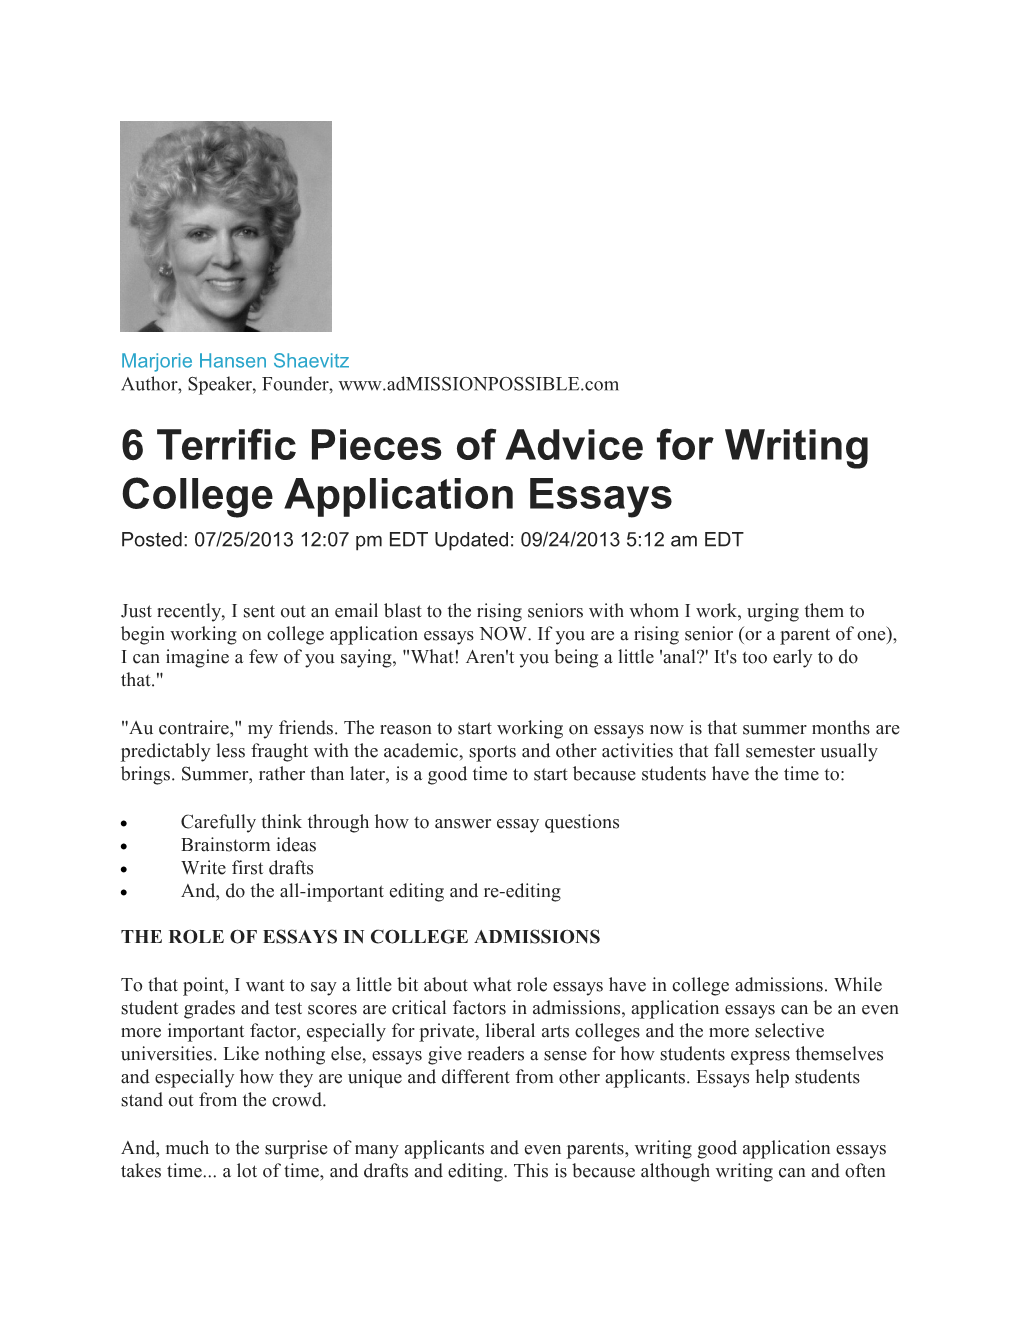 6 Terrific Pieces of Advice for Writing College Application Essays